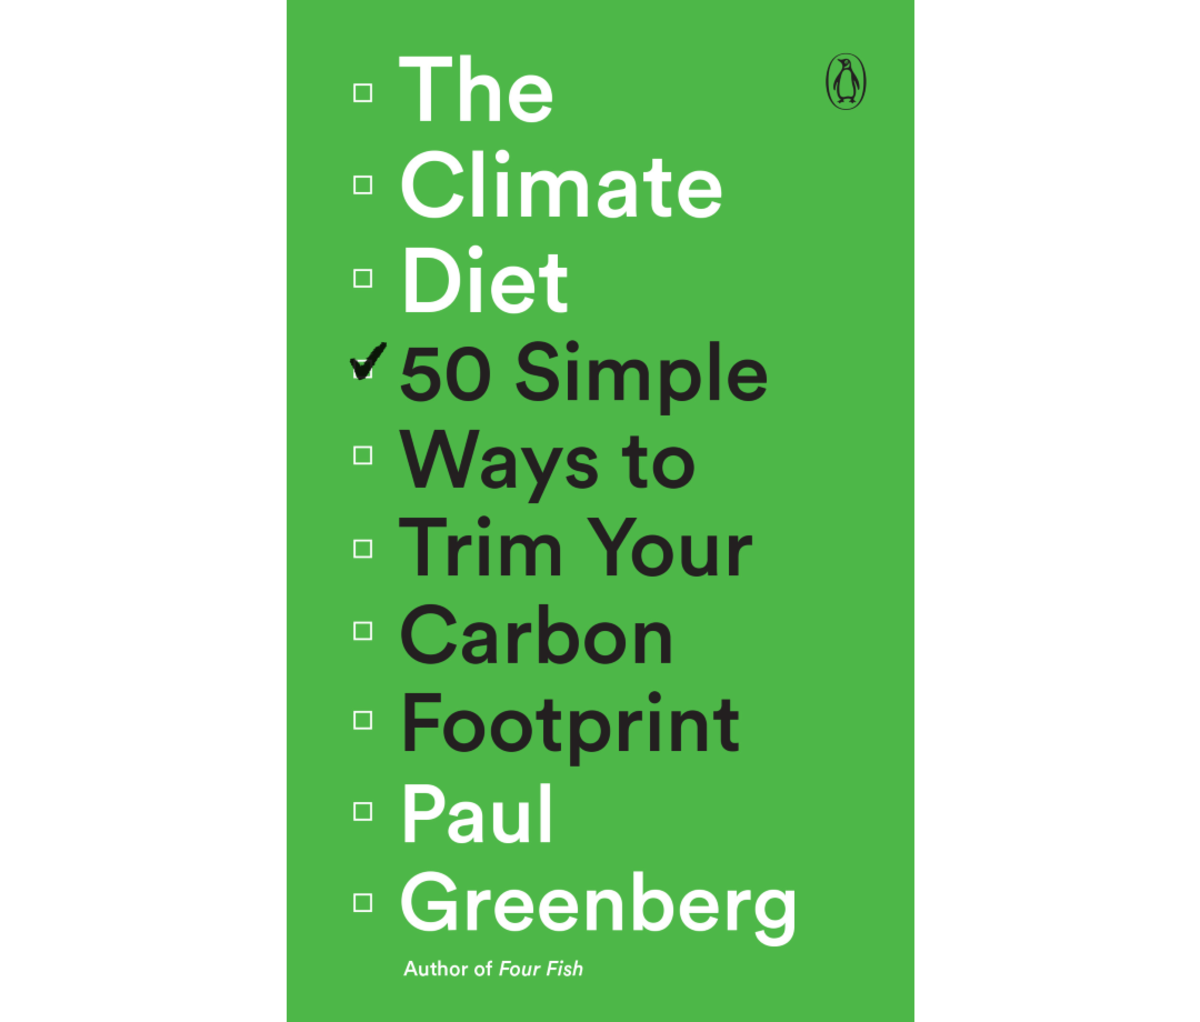 The Climate Diet- 50 Simple Ways to Trim Your Carbon Footprint by Paul Greenberg